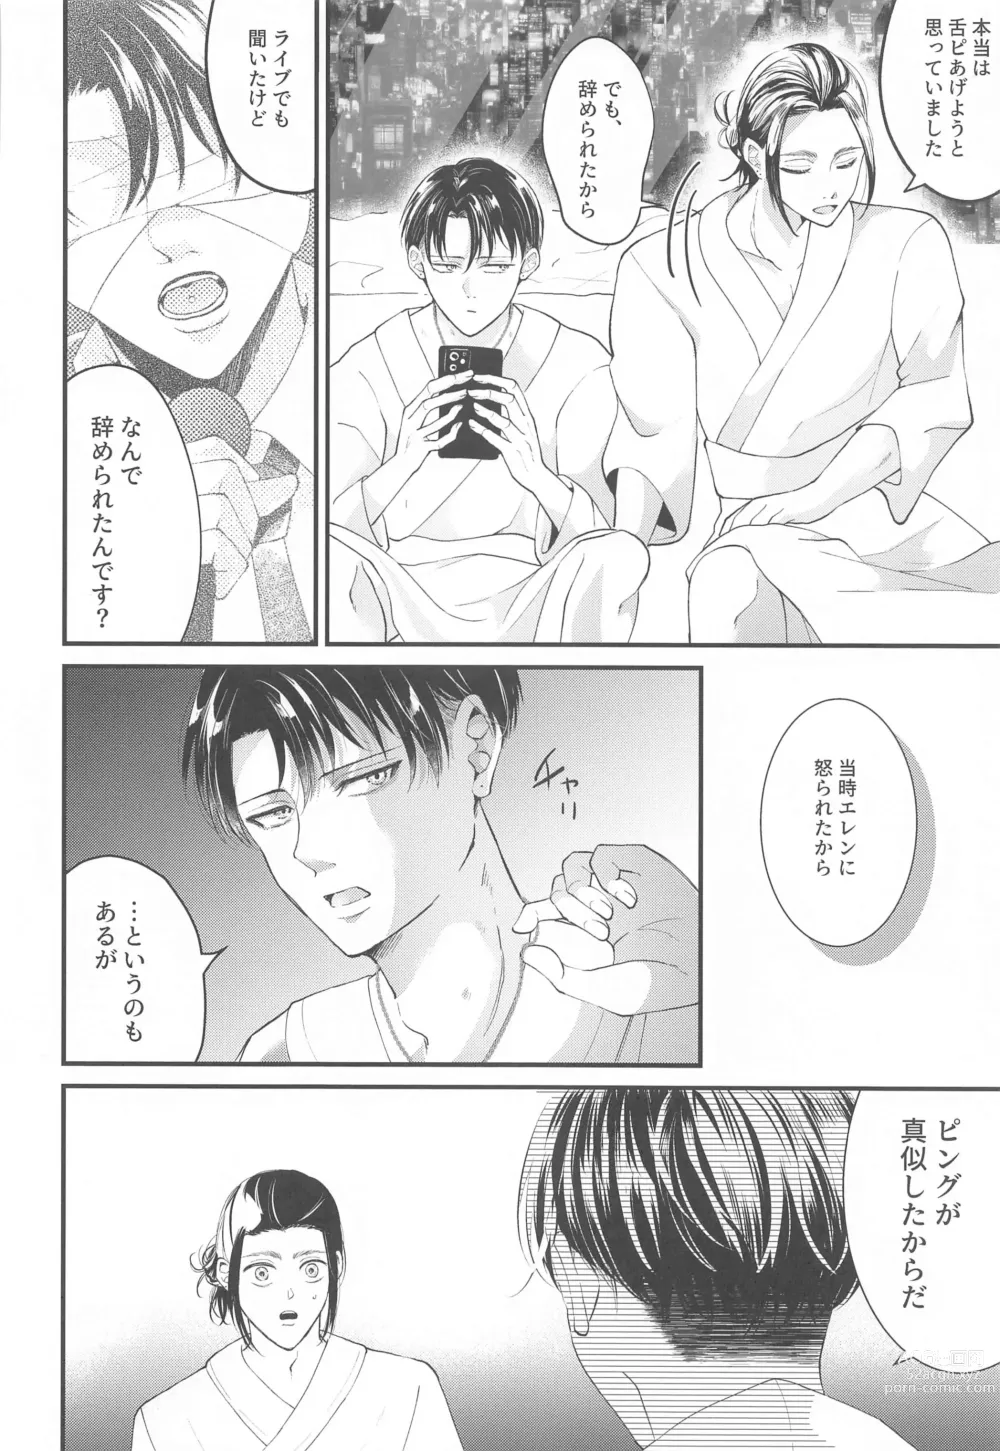 Page 39 of doujinshi Suggestive Birthday